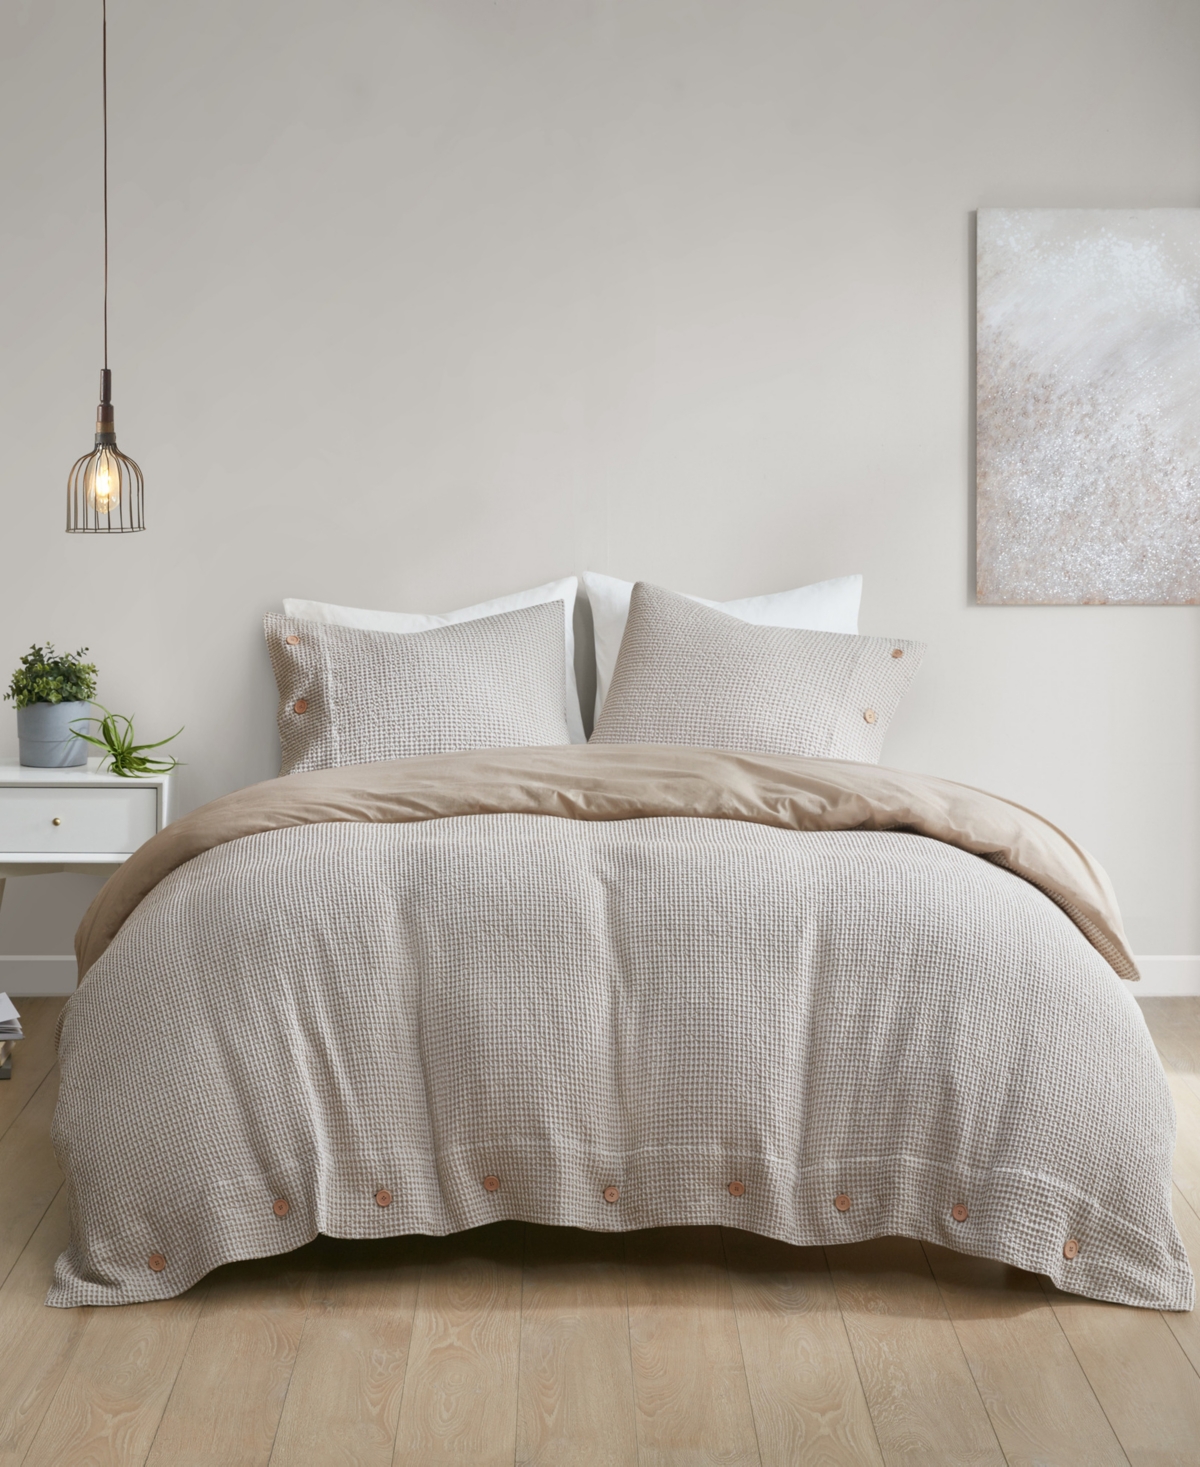 Clean Spaces Mara Waffle Weave 3-pc. Duvet Cover Set, Full/queen In Taupe